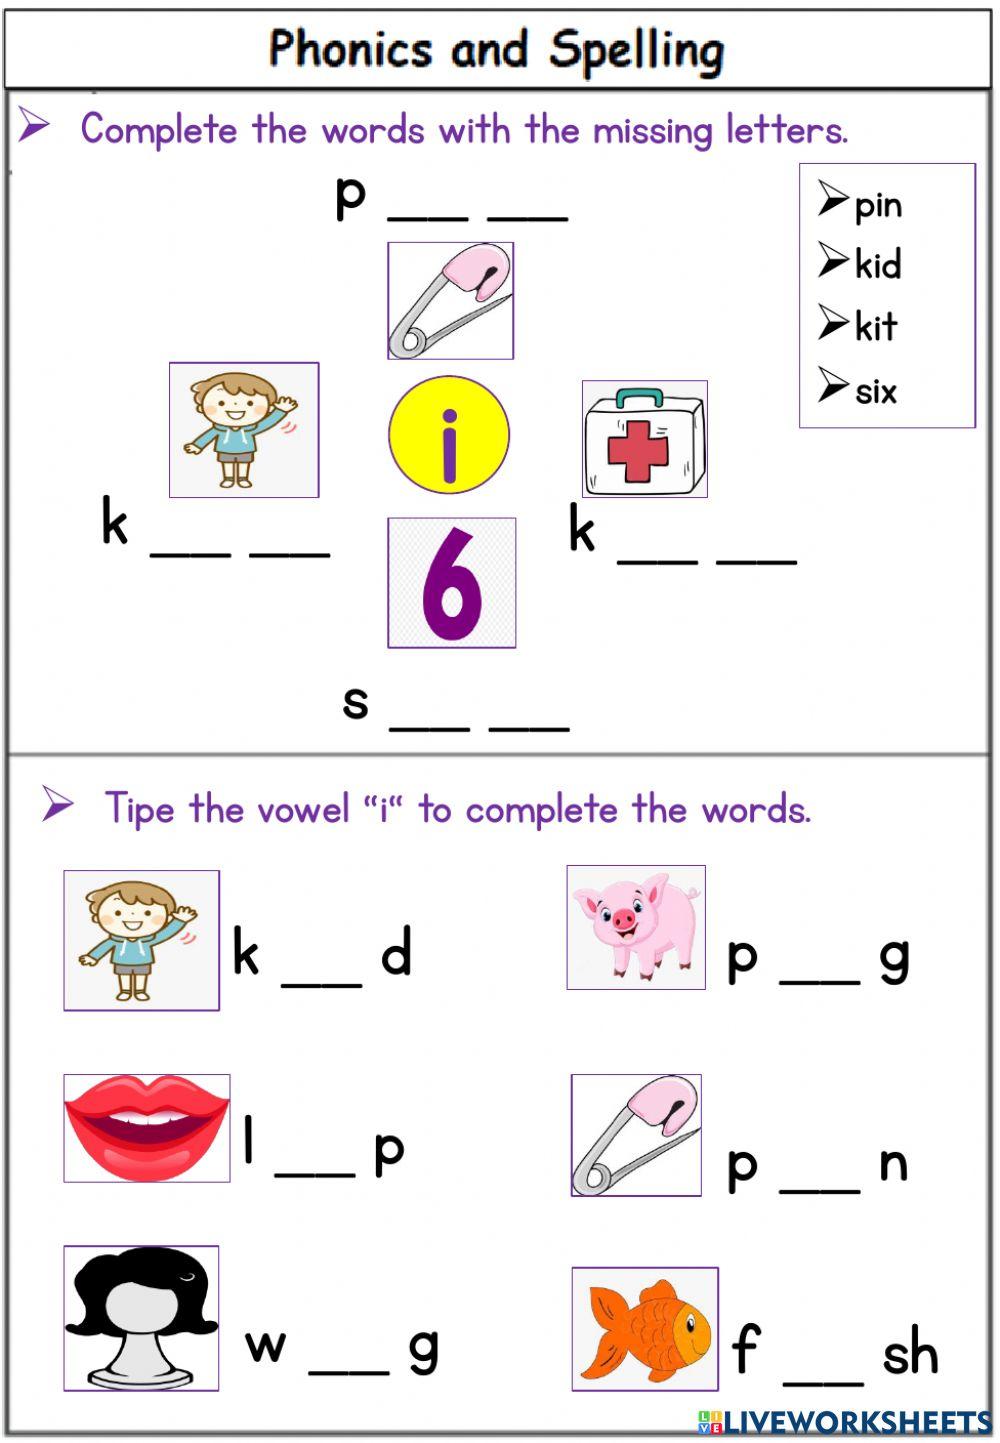 Phonics and spelling